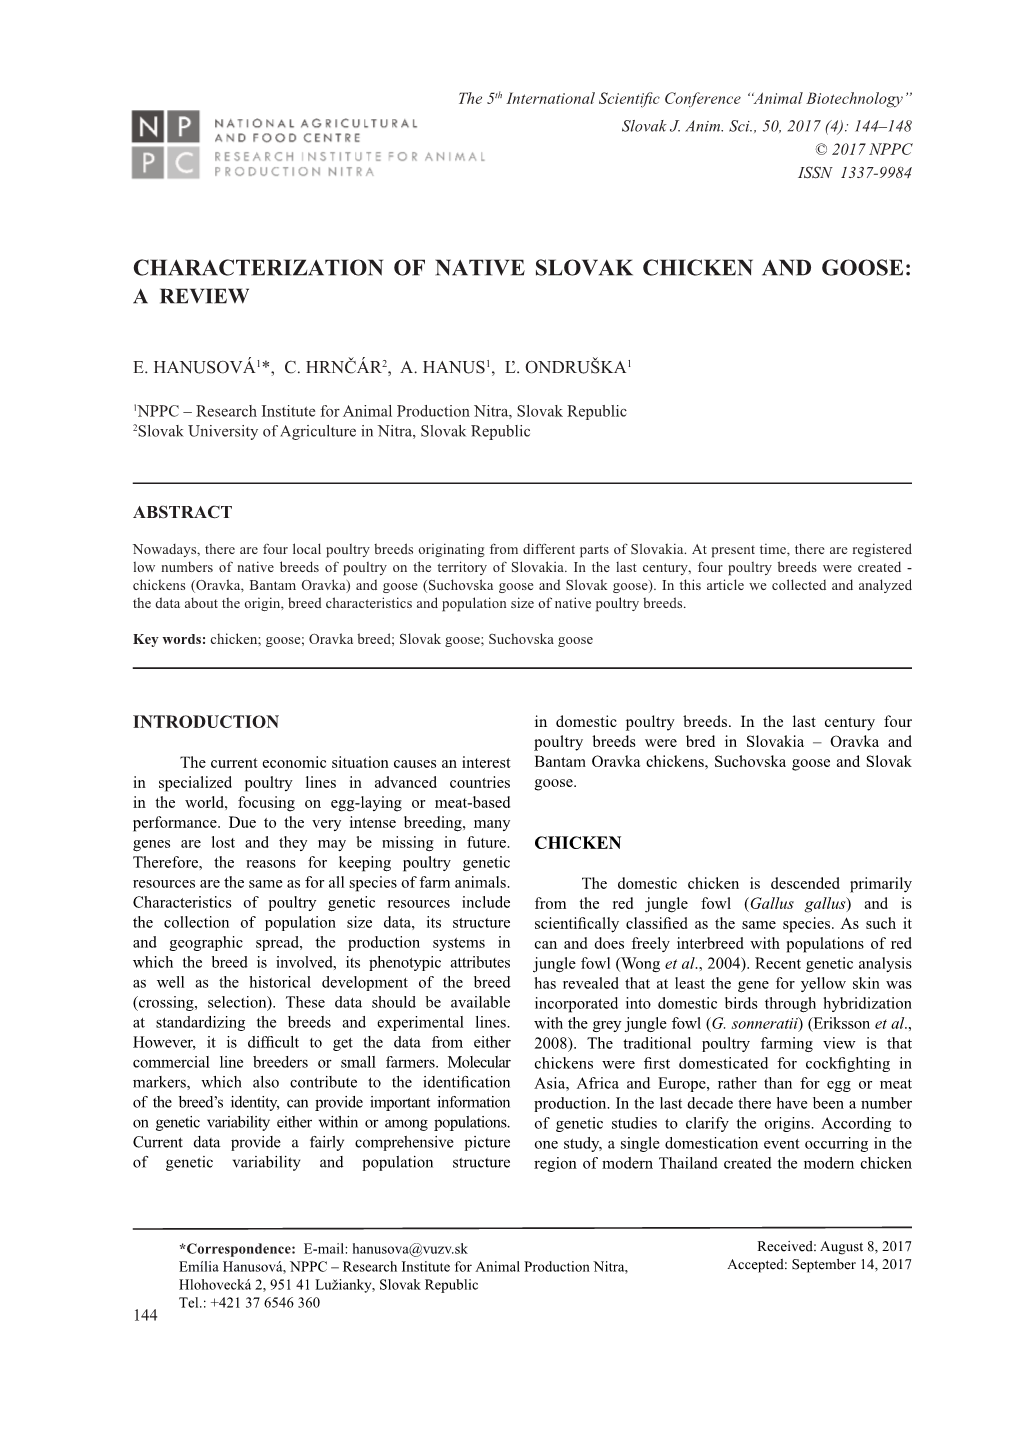 CHARACTERIZATION of NATIVE SLOVAK CHICKEN and GOOSE: a Review